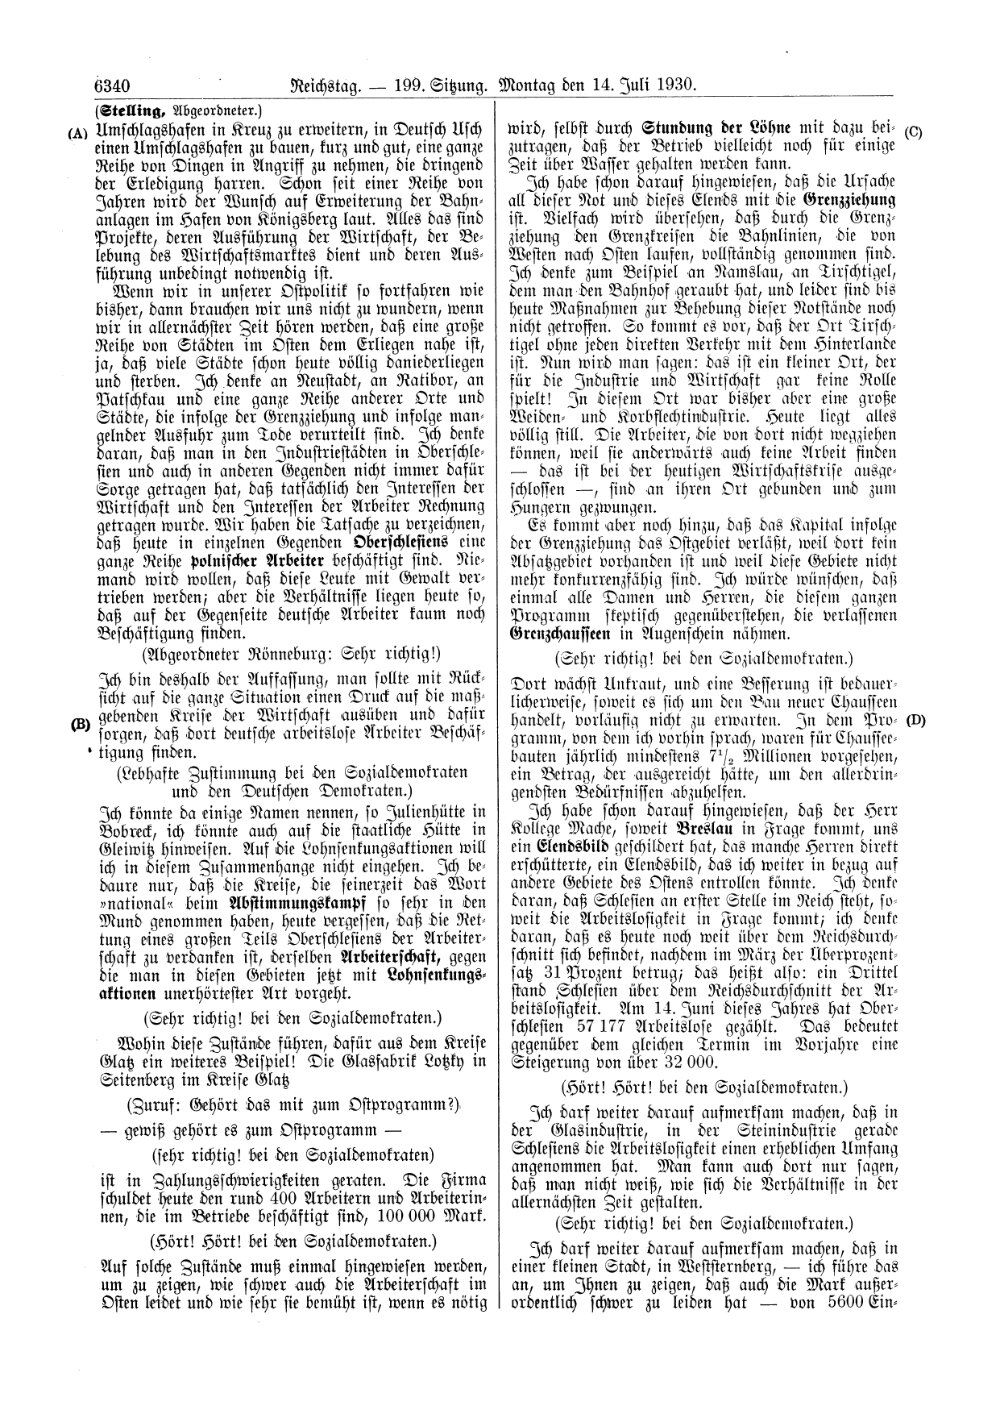 Scan of page 6340